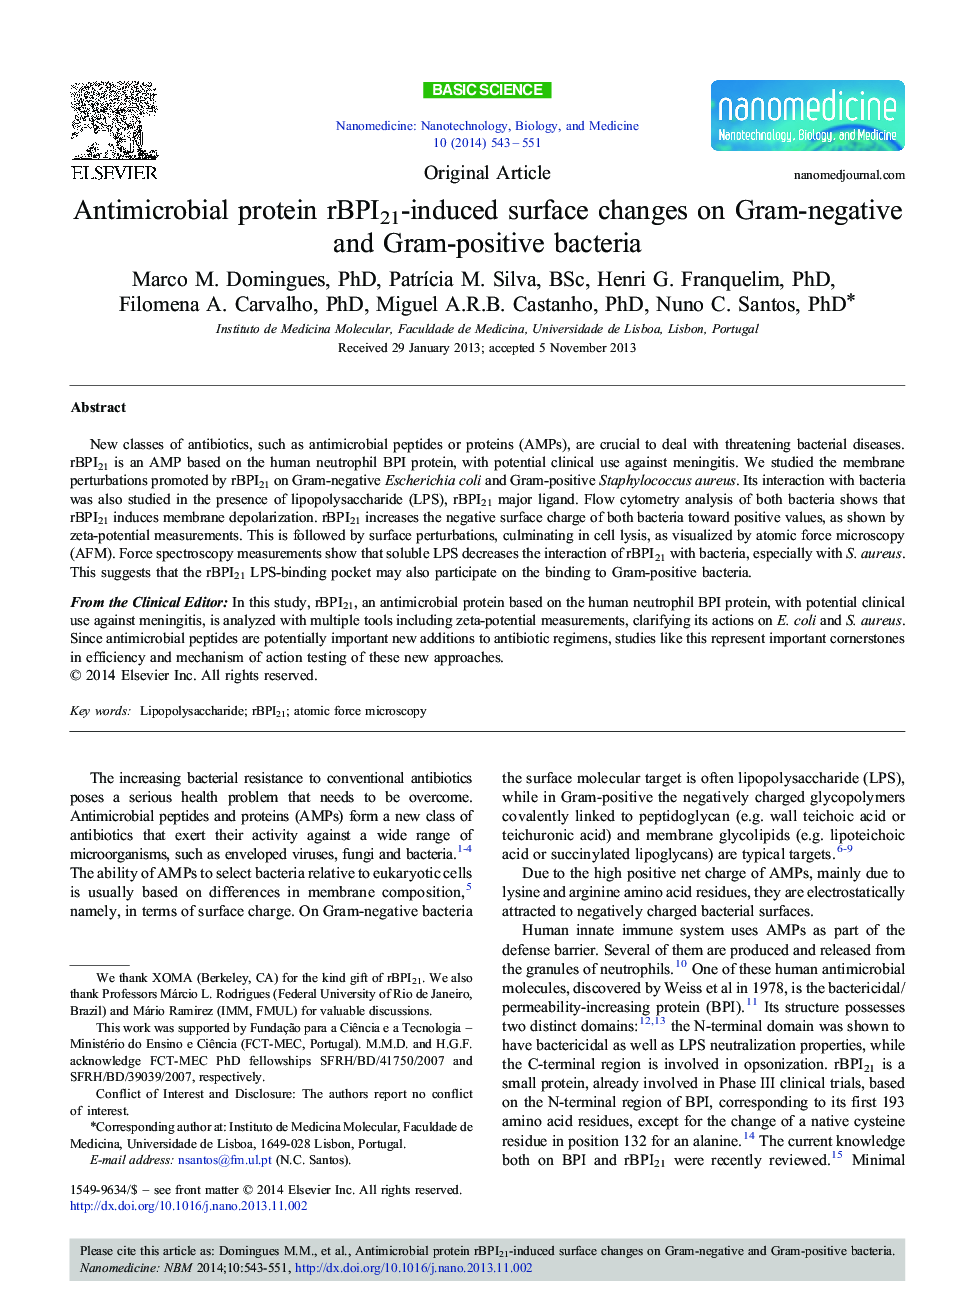 Antimicrobial protein rBPI21-induced surface changes on Gram-negative and Gram-positive bacteria 